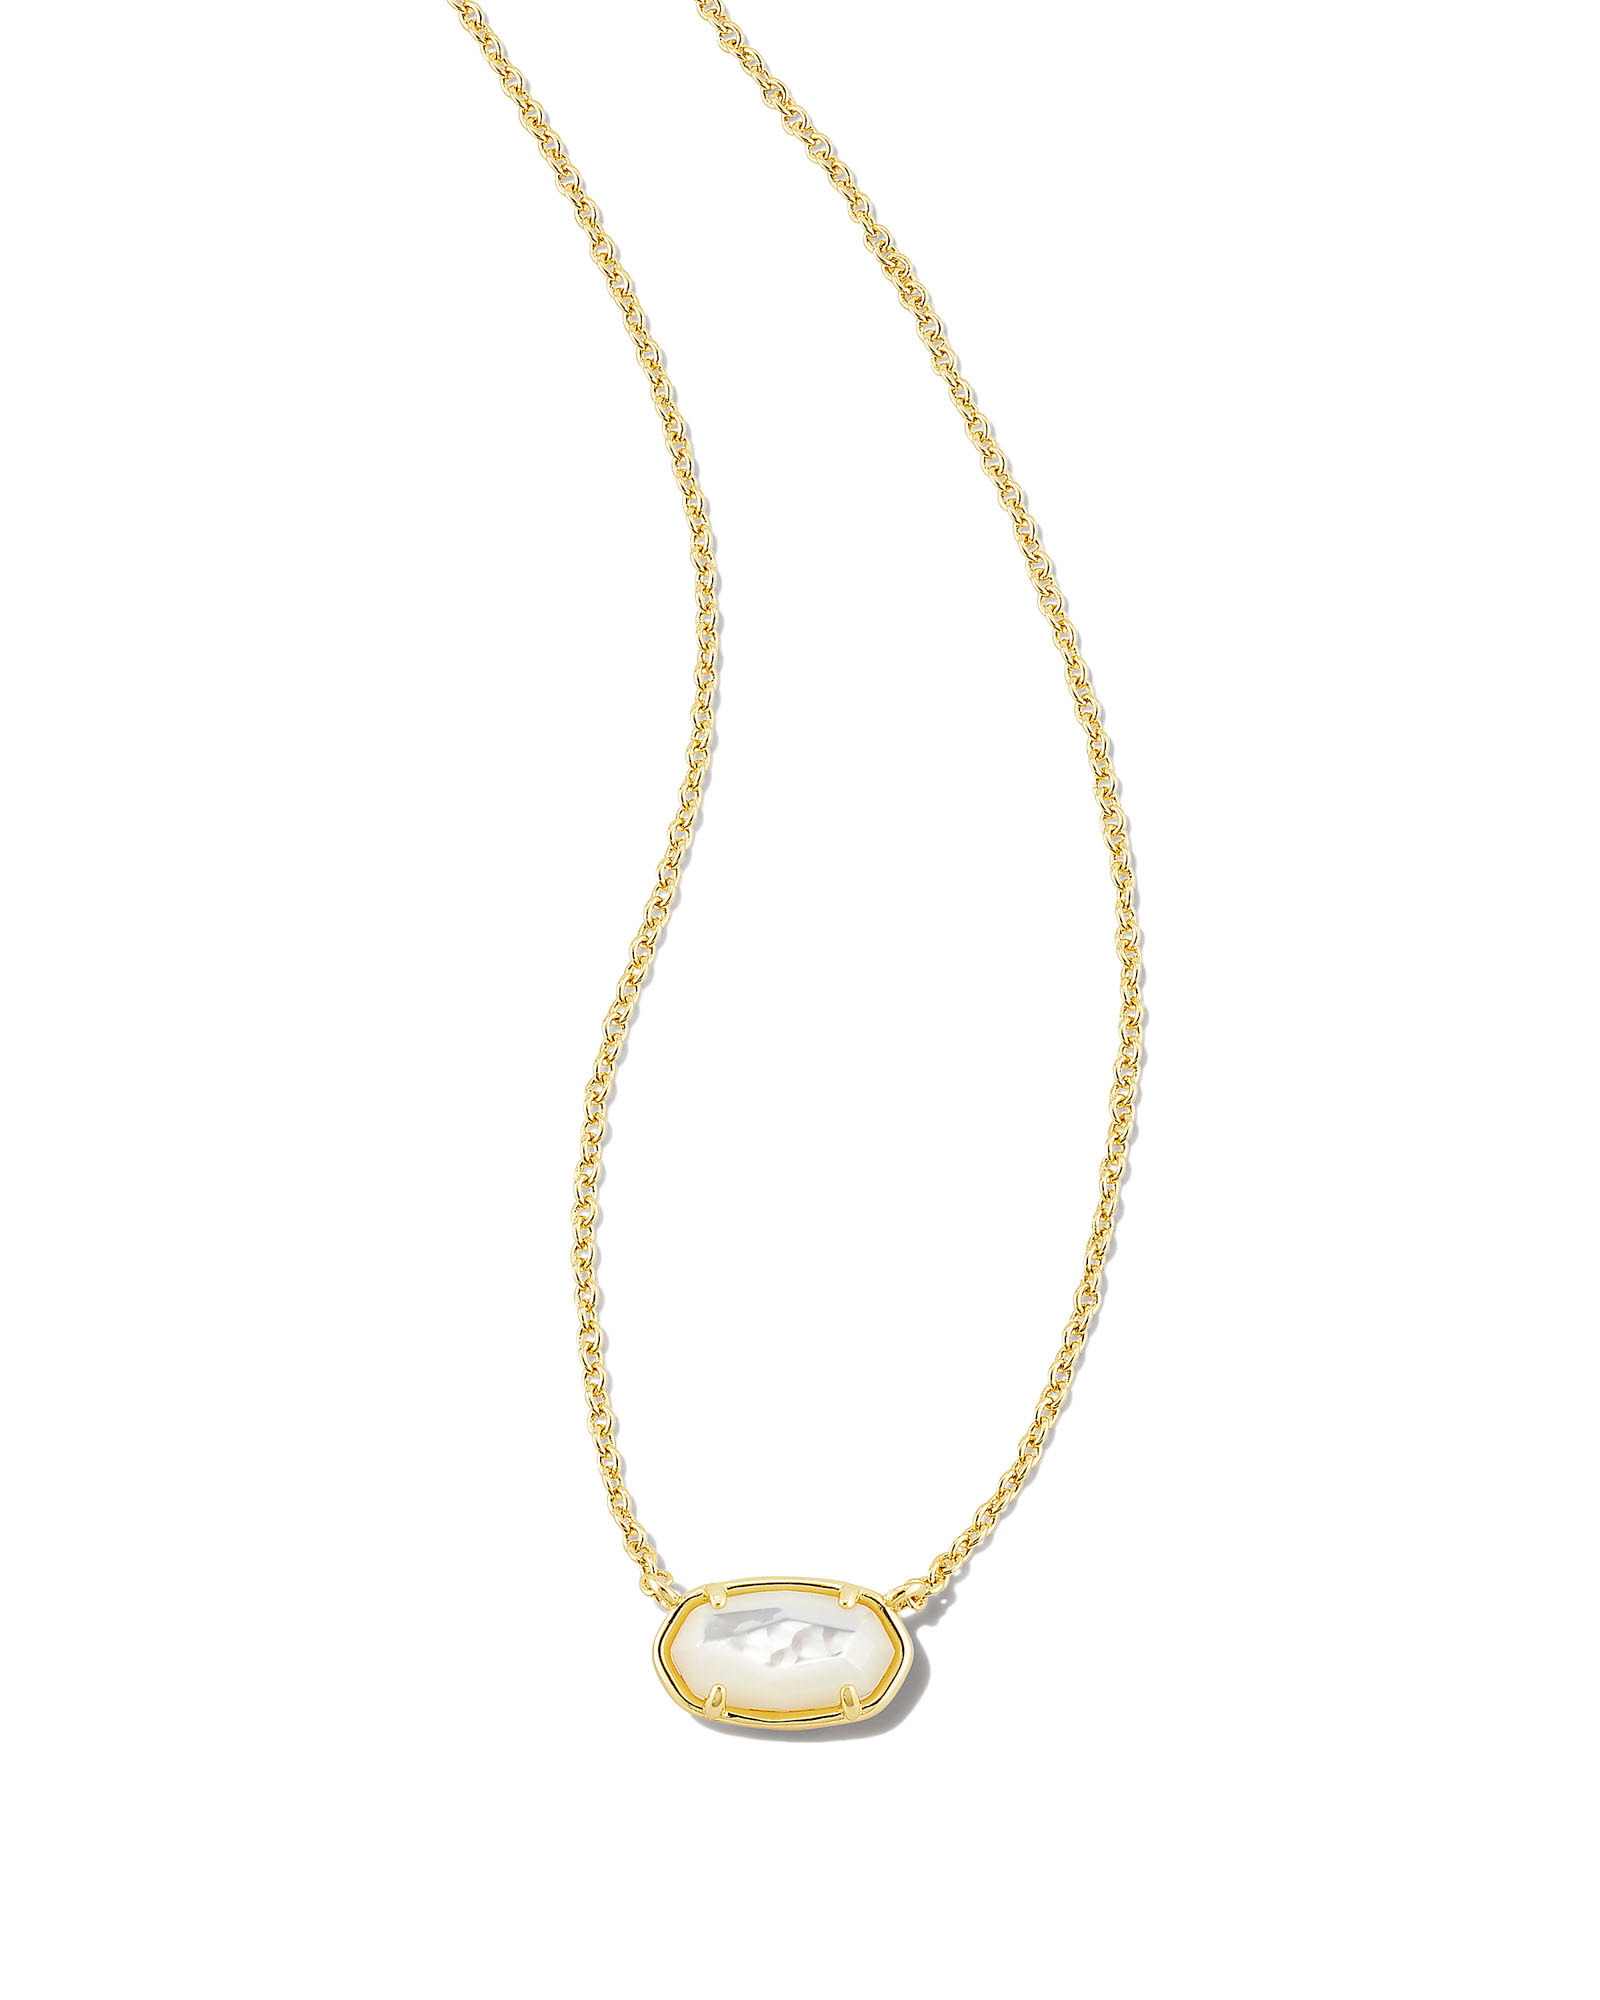 24K 995 Pure Gold Necklace for Women - 1-GN-V00633 in 54.820 Grams